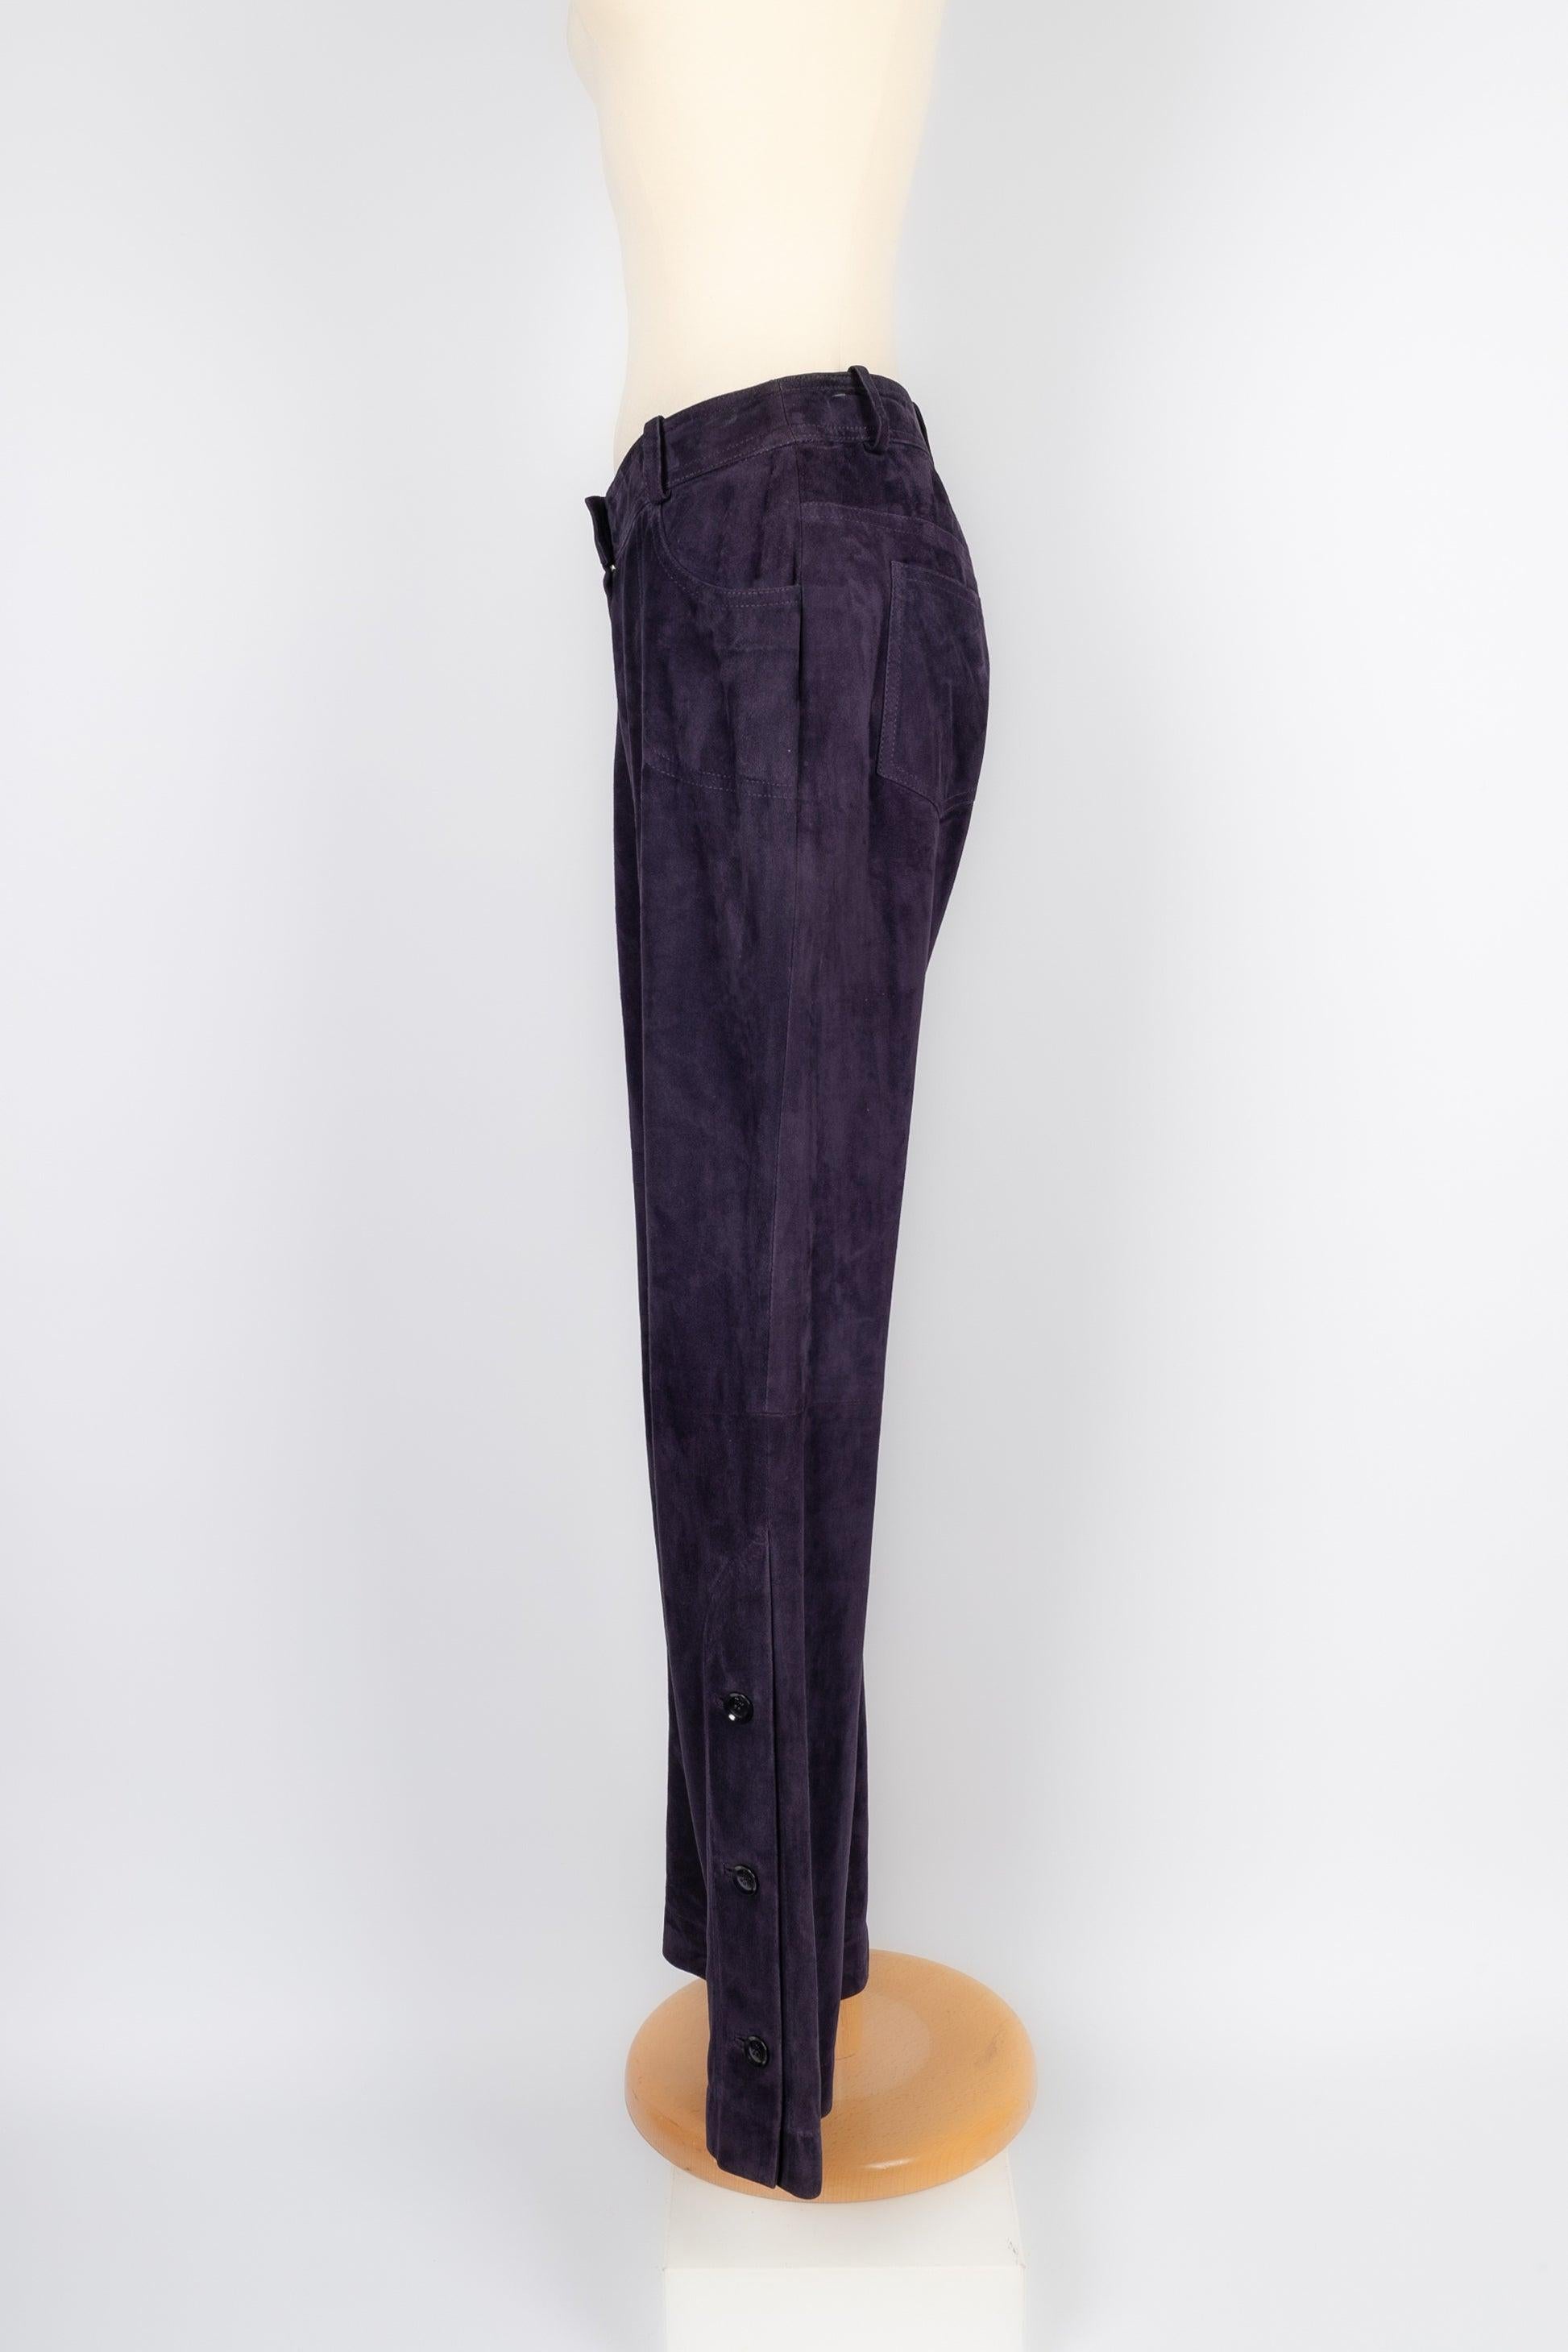 Dior - (Made in France) Purple suede pants ornamented with buttons on the pants' bottom. 38FR size indicated.

Additional information:
Condition: Good condition
Dimensions: Waist: 38 cm - Hips: 45 cm - Length: 100 cm

Seller Reference: FJ88

